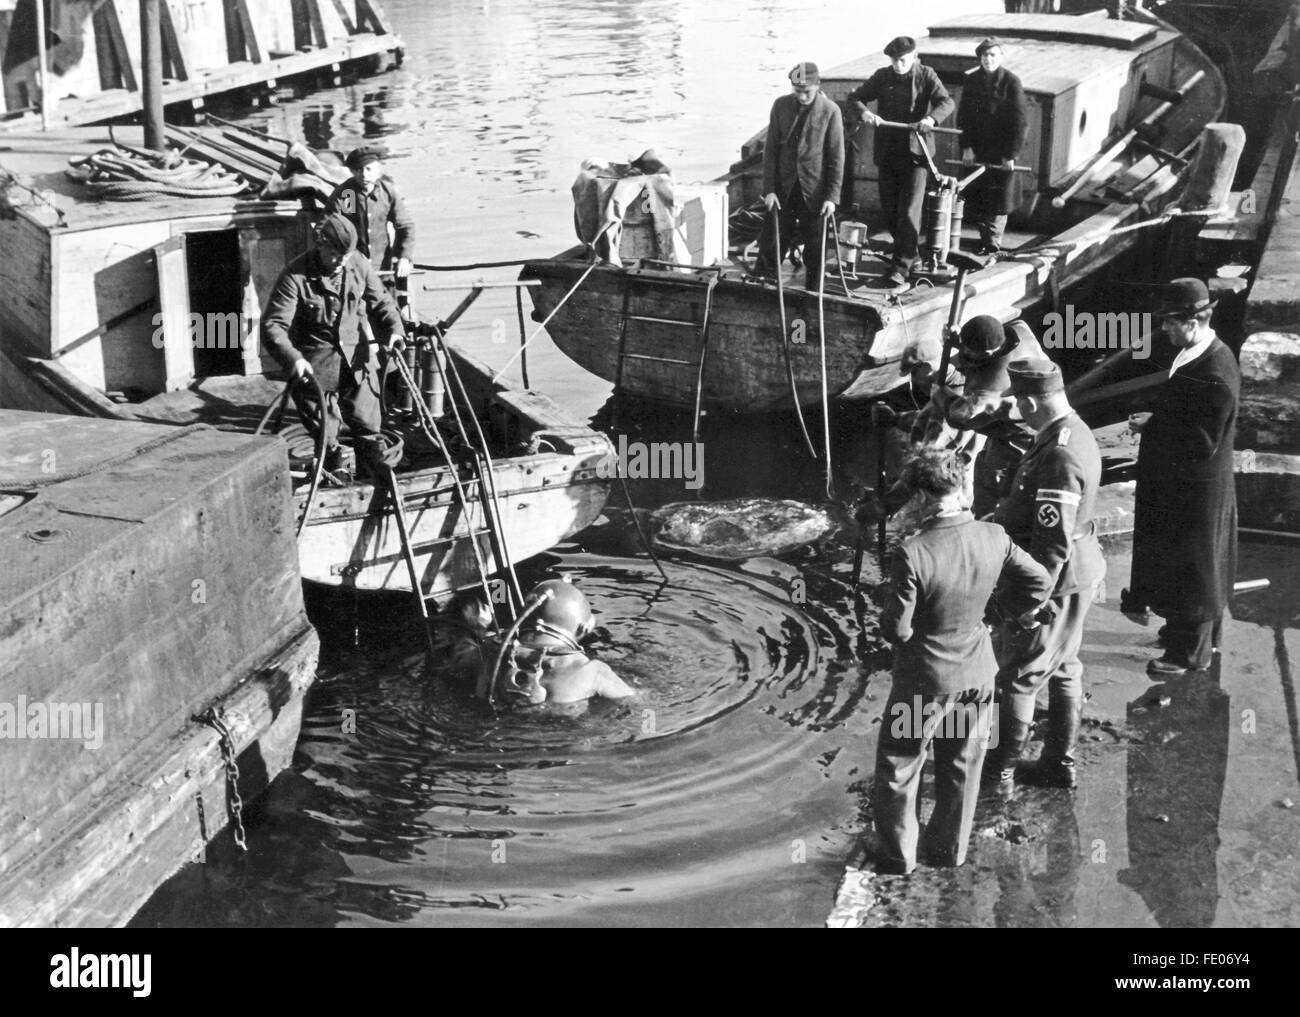 The Nazi propaganda picture shows the salvage of a ship by the Todt Organisation - here a diving operation to assess the situation of the sunk ship and and to attach mooring ropes for the uplift. The photo was taken in January 1944. Fotoarchiv für Zeitgeschichtee - NO WIRE SERVICE - Stock Photo